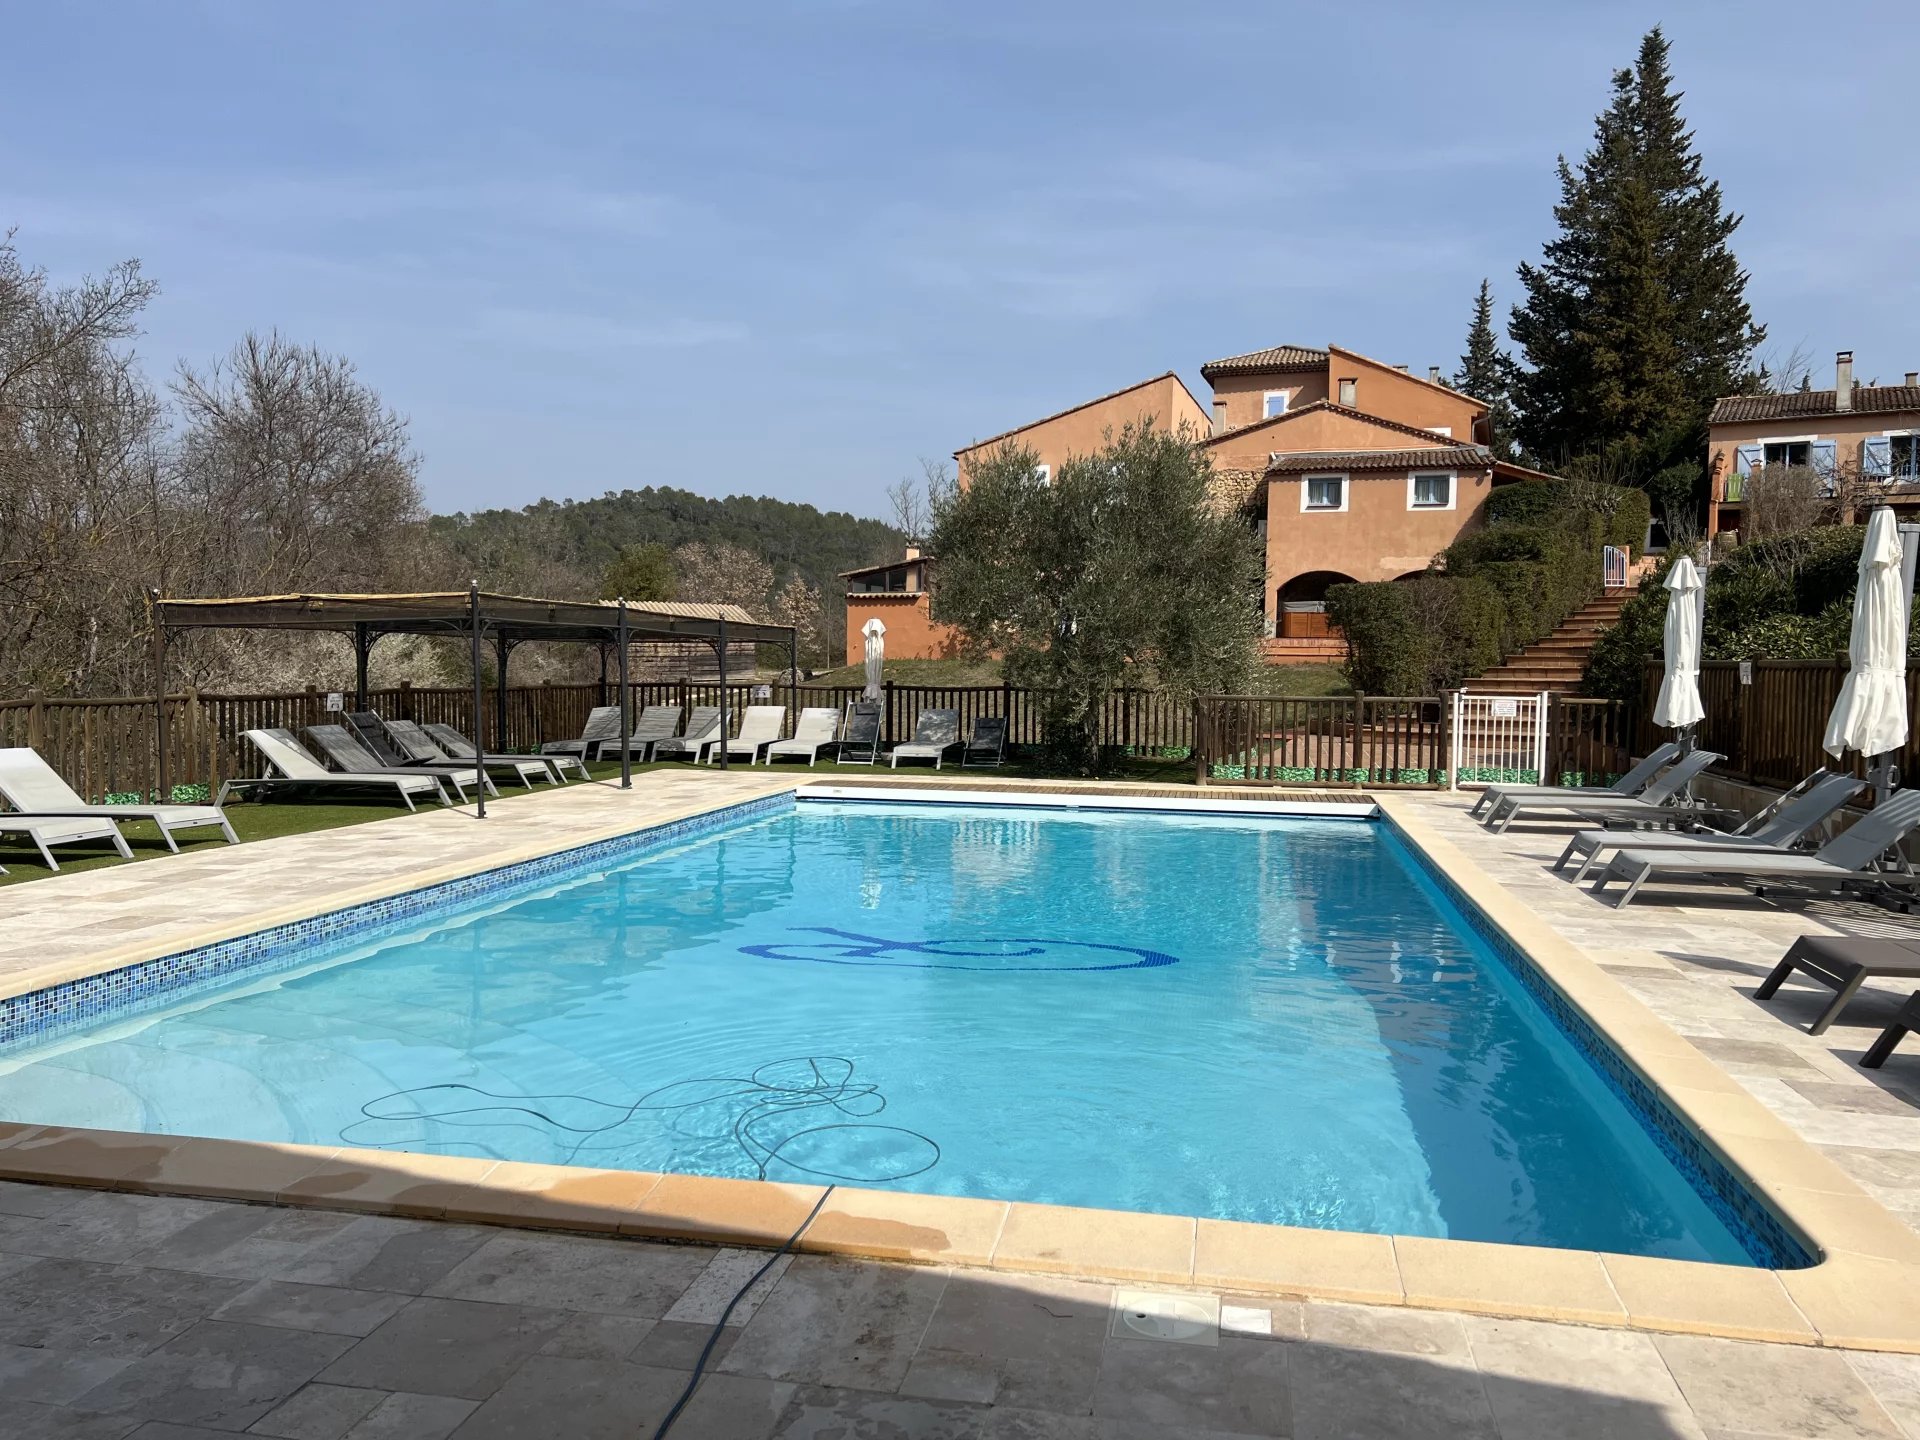 18th century property, 9 apartments, 48 hectares, pool, jacuzzi, Châteauvert